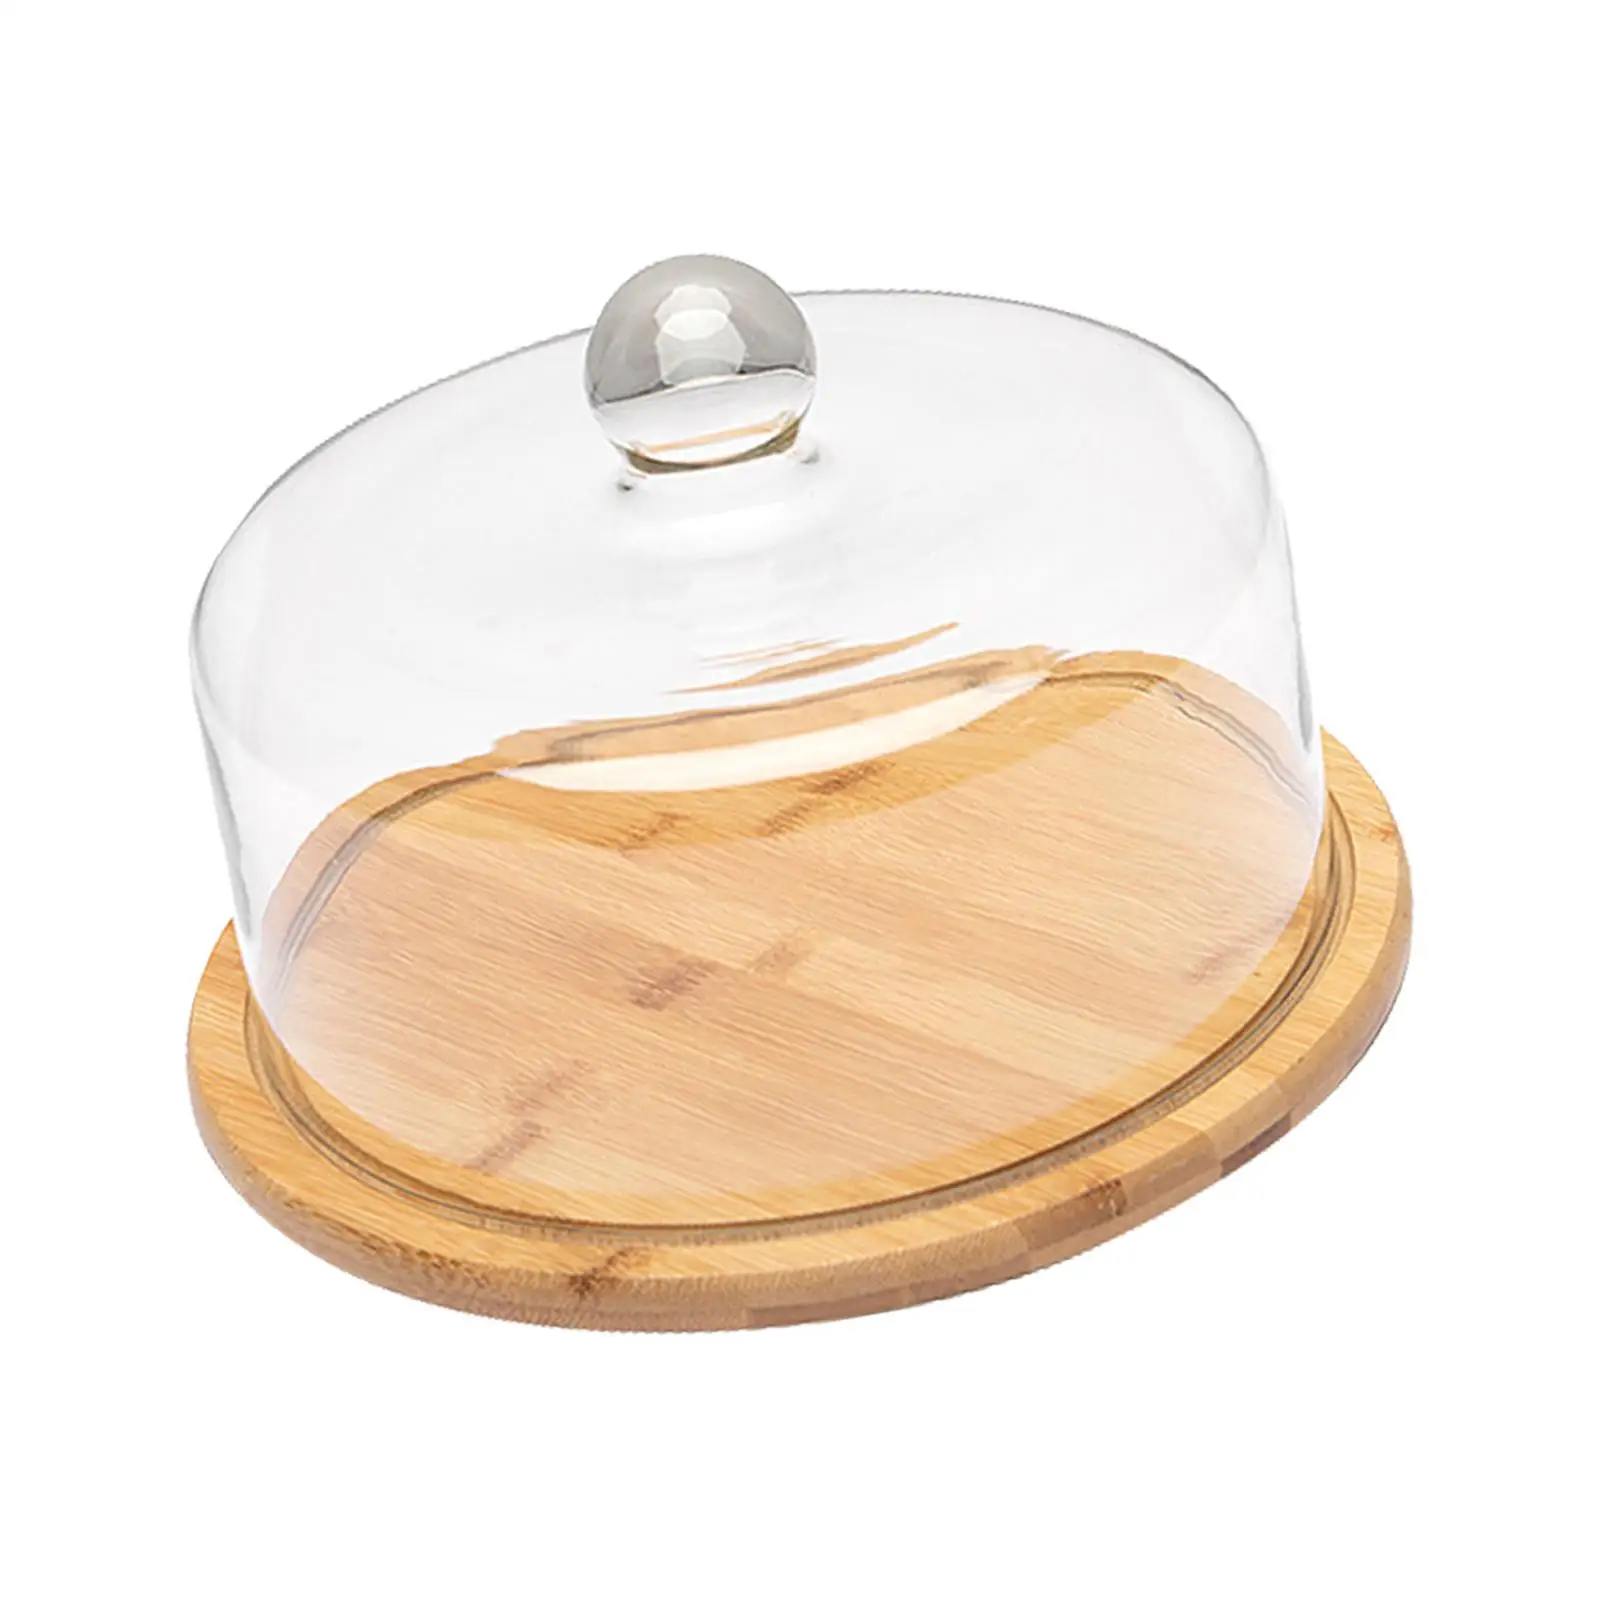 Dome Glass Cover Serving Tray Wood Cake Stand with Lid Pies Pan Cheese Board Clear for Household Hotels Party Dinnerware Salad